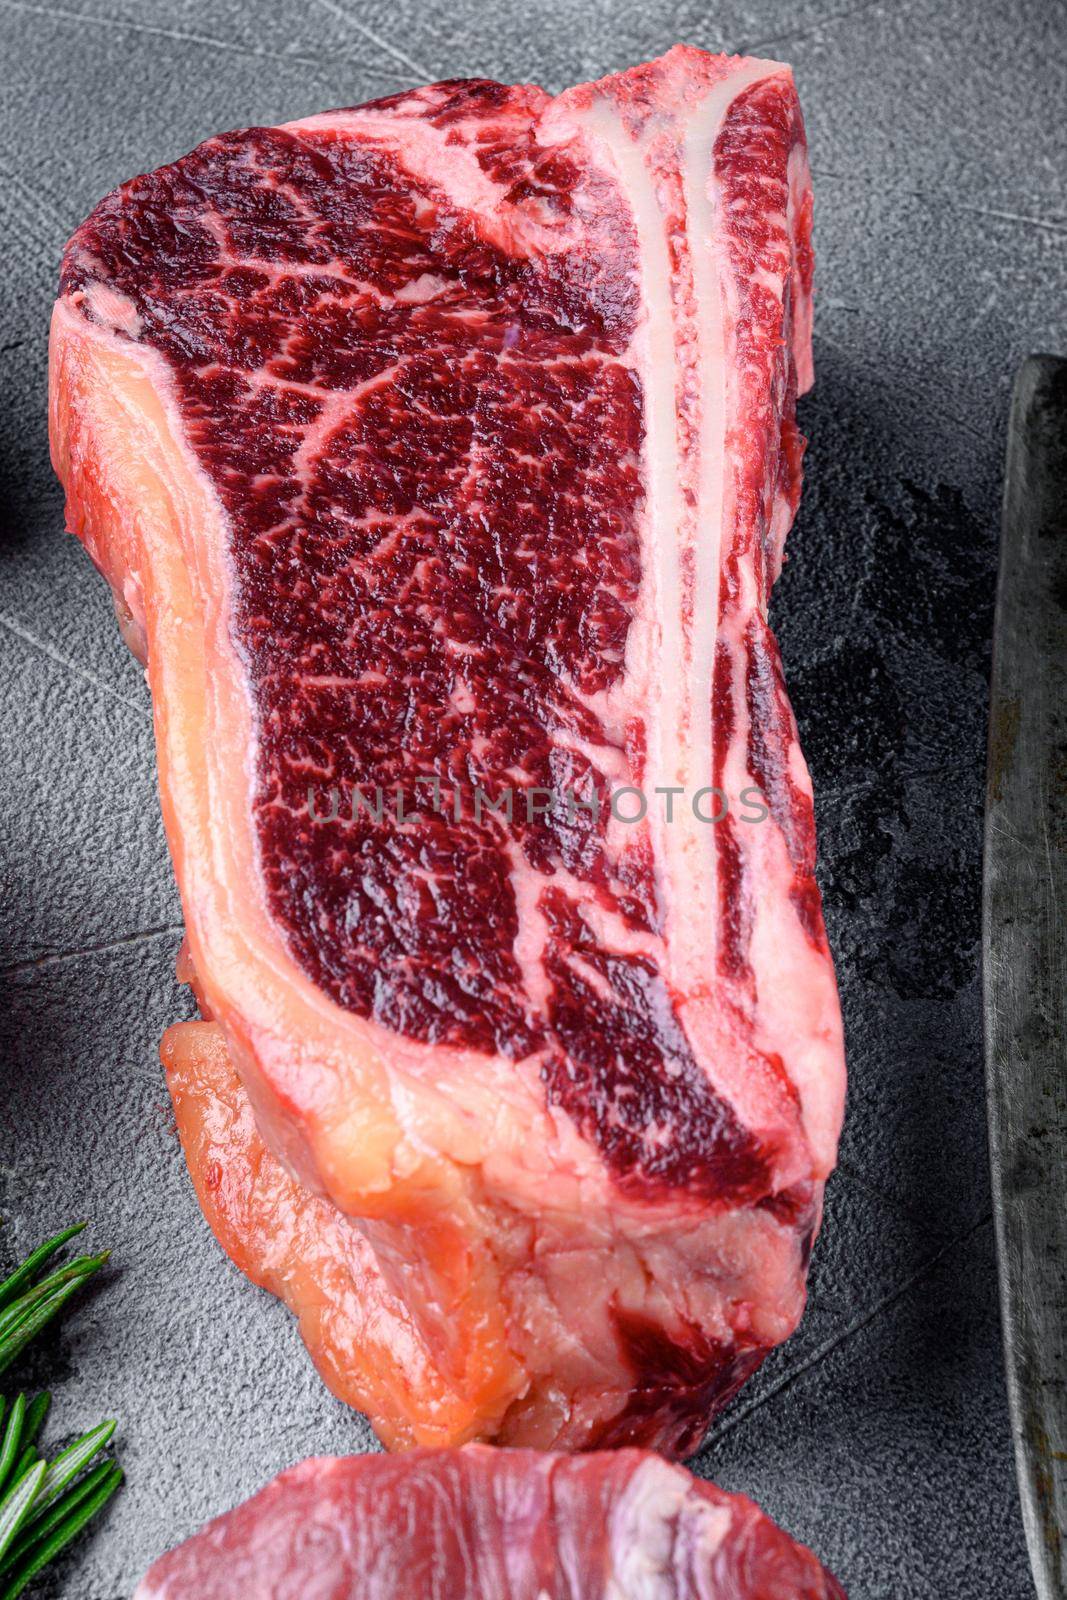 Club steak raw marbled beef meat, on gray stone background by Ilianesolenyi